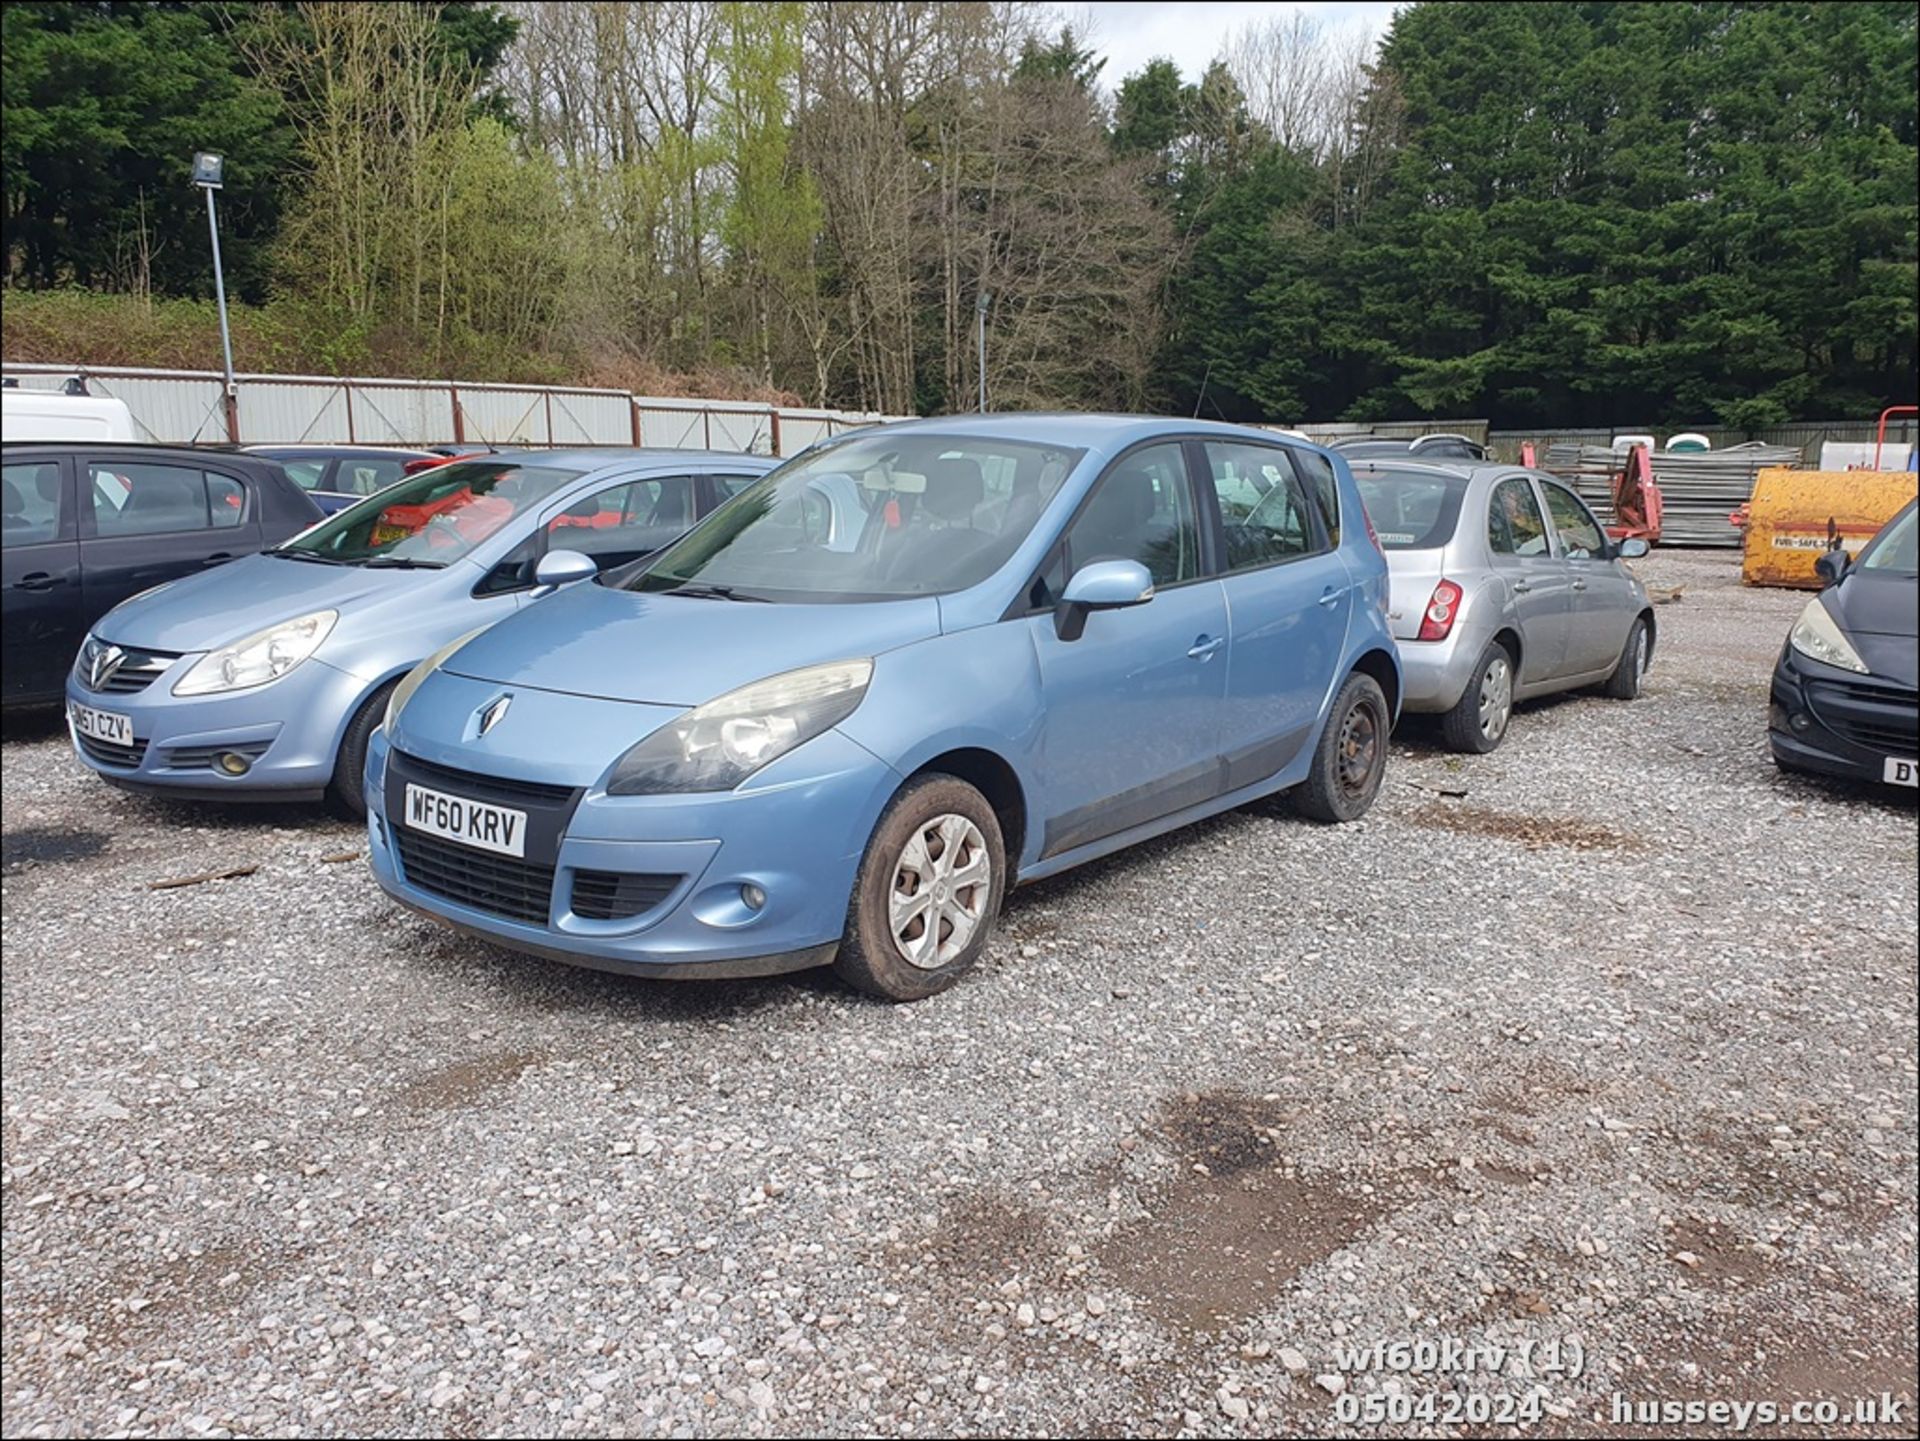 10/60 RENAULT SCENIC EXPRESSION DCI 105 - 1461cc 5dr MPV (Blue) - Image 2 of 50